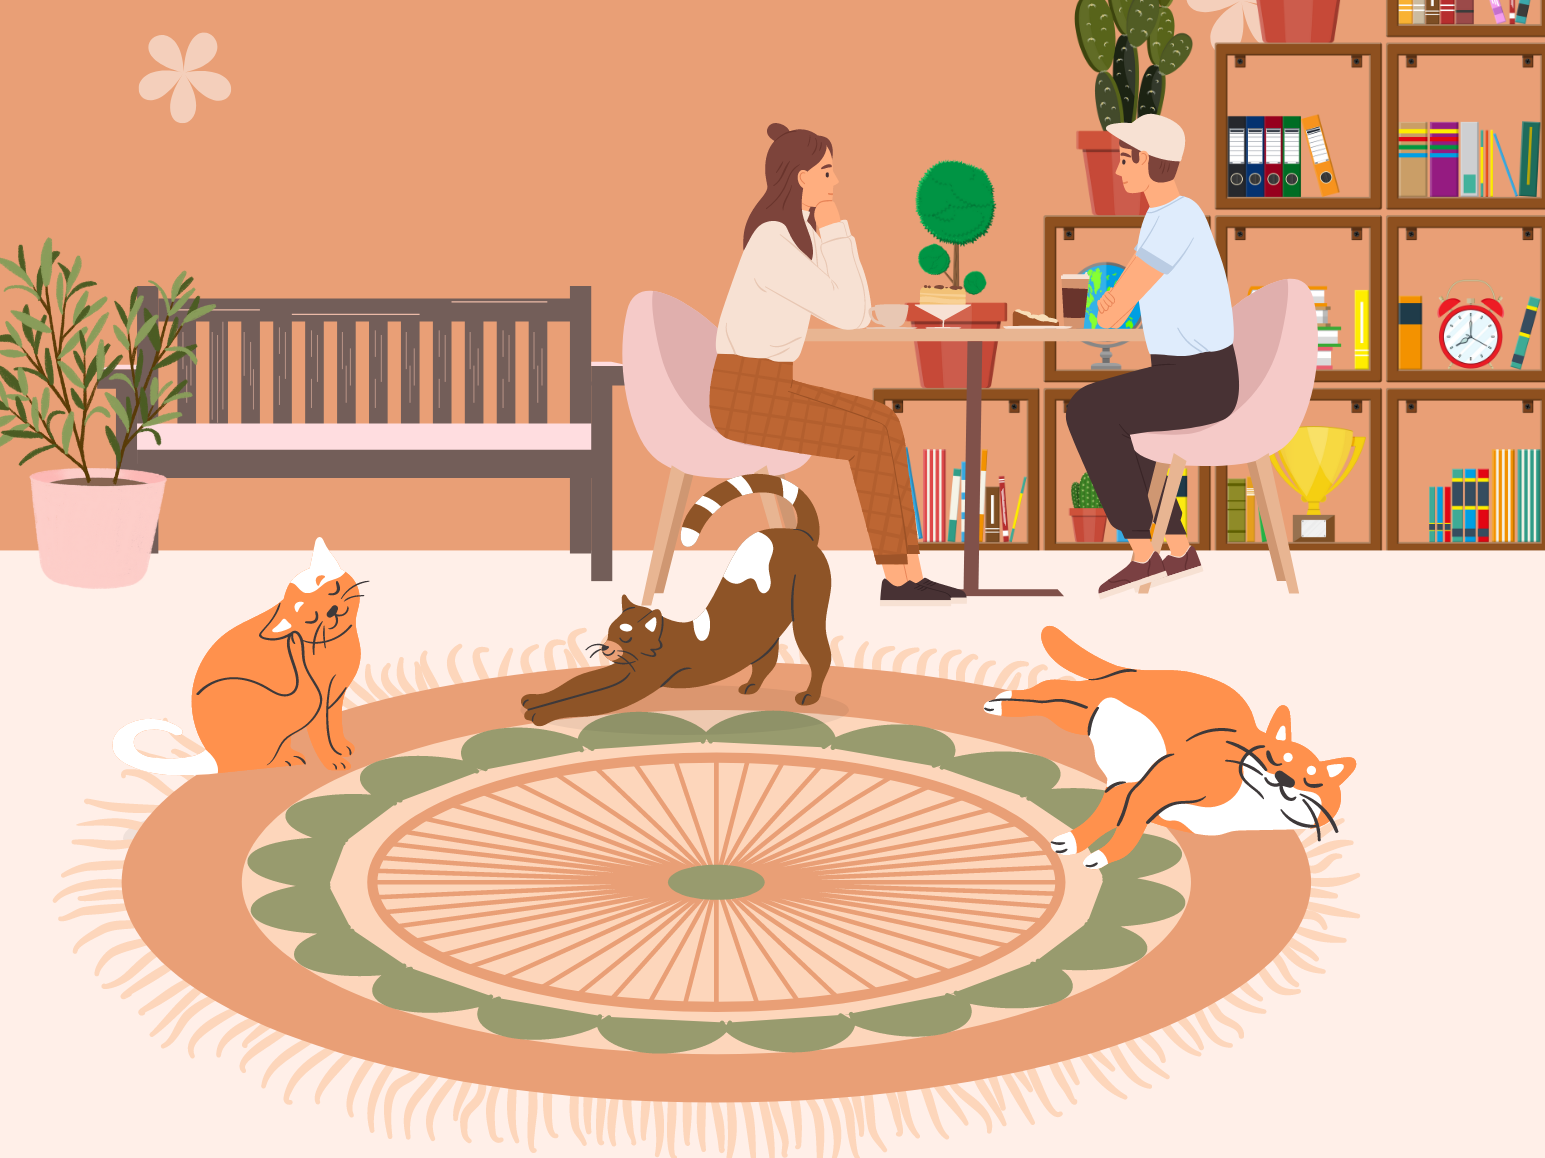 cats stretched out on a rug and some folks drinking hot beverages at a table